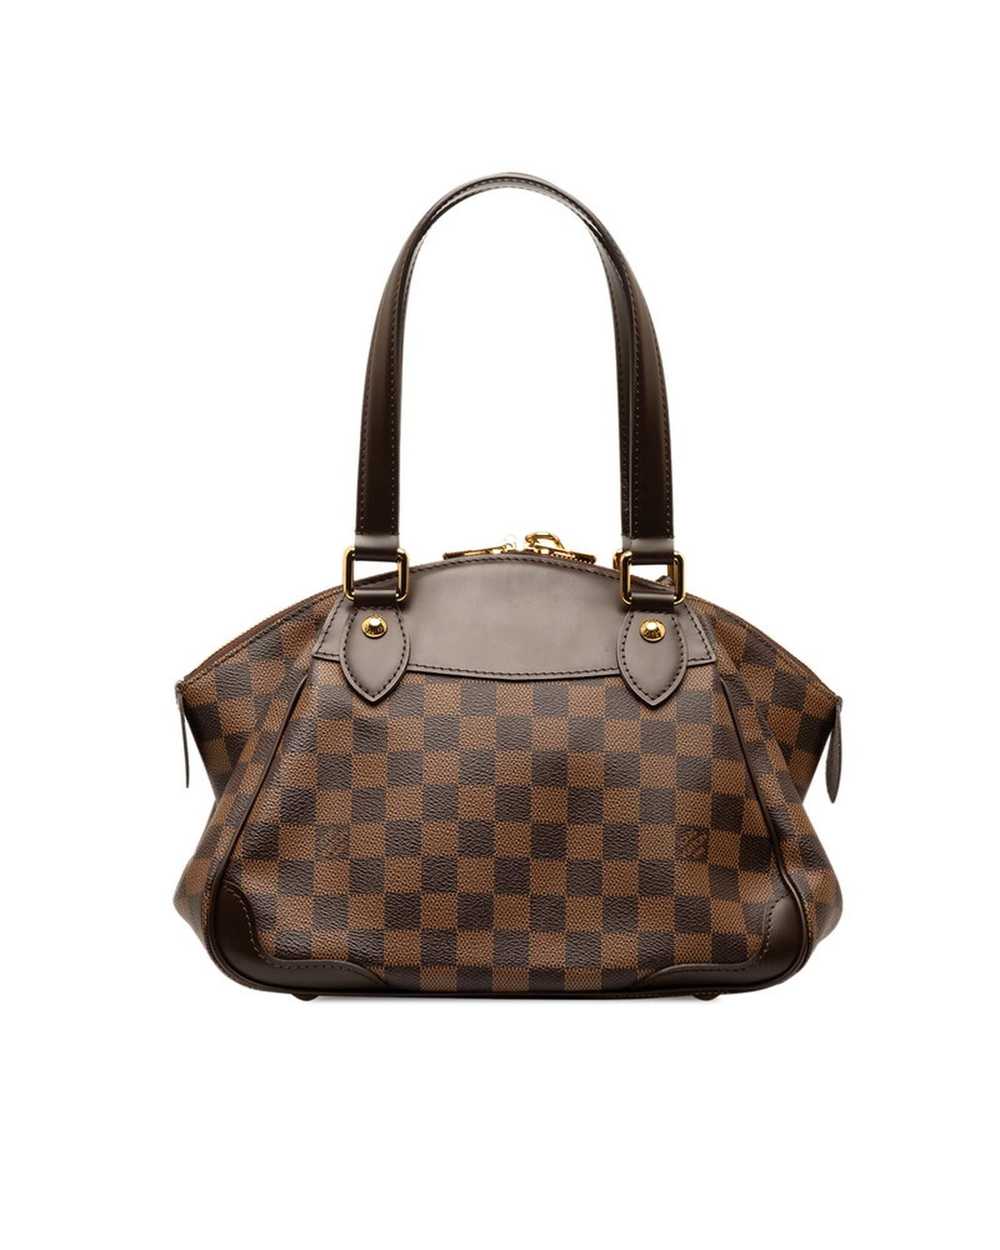 Louis Vuitton Brown Leather Verona PM Bag in Exce… - image 3